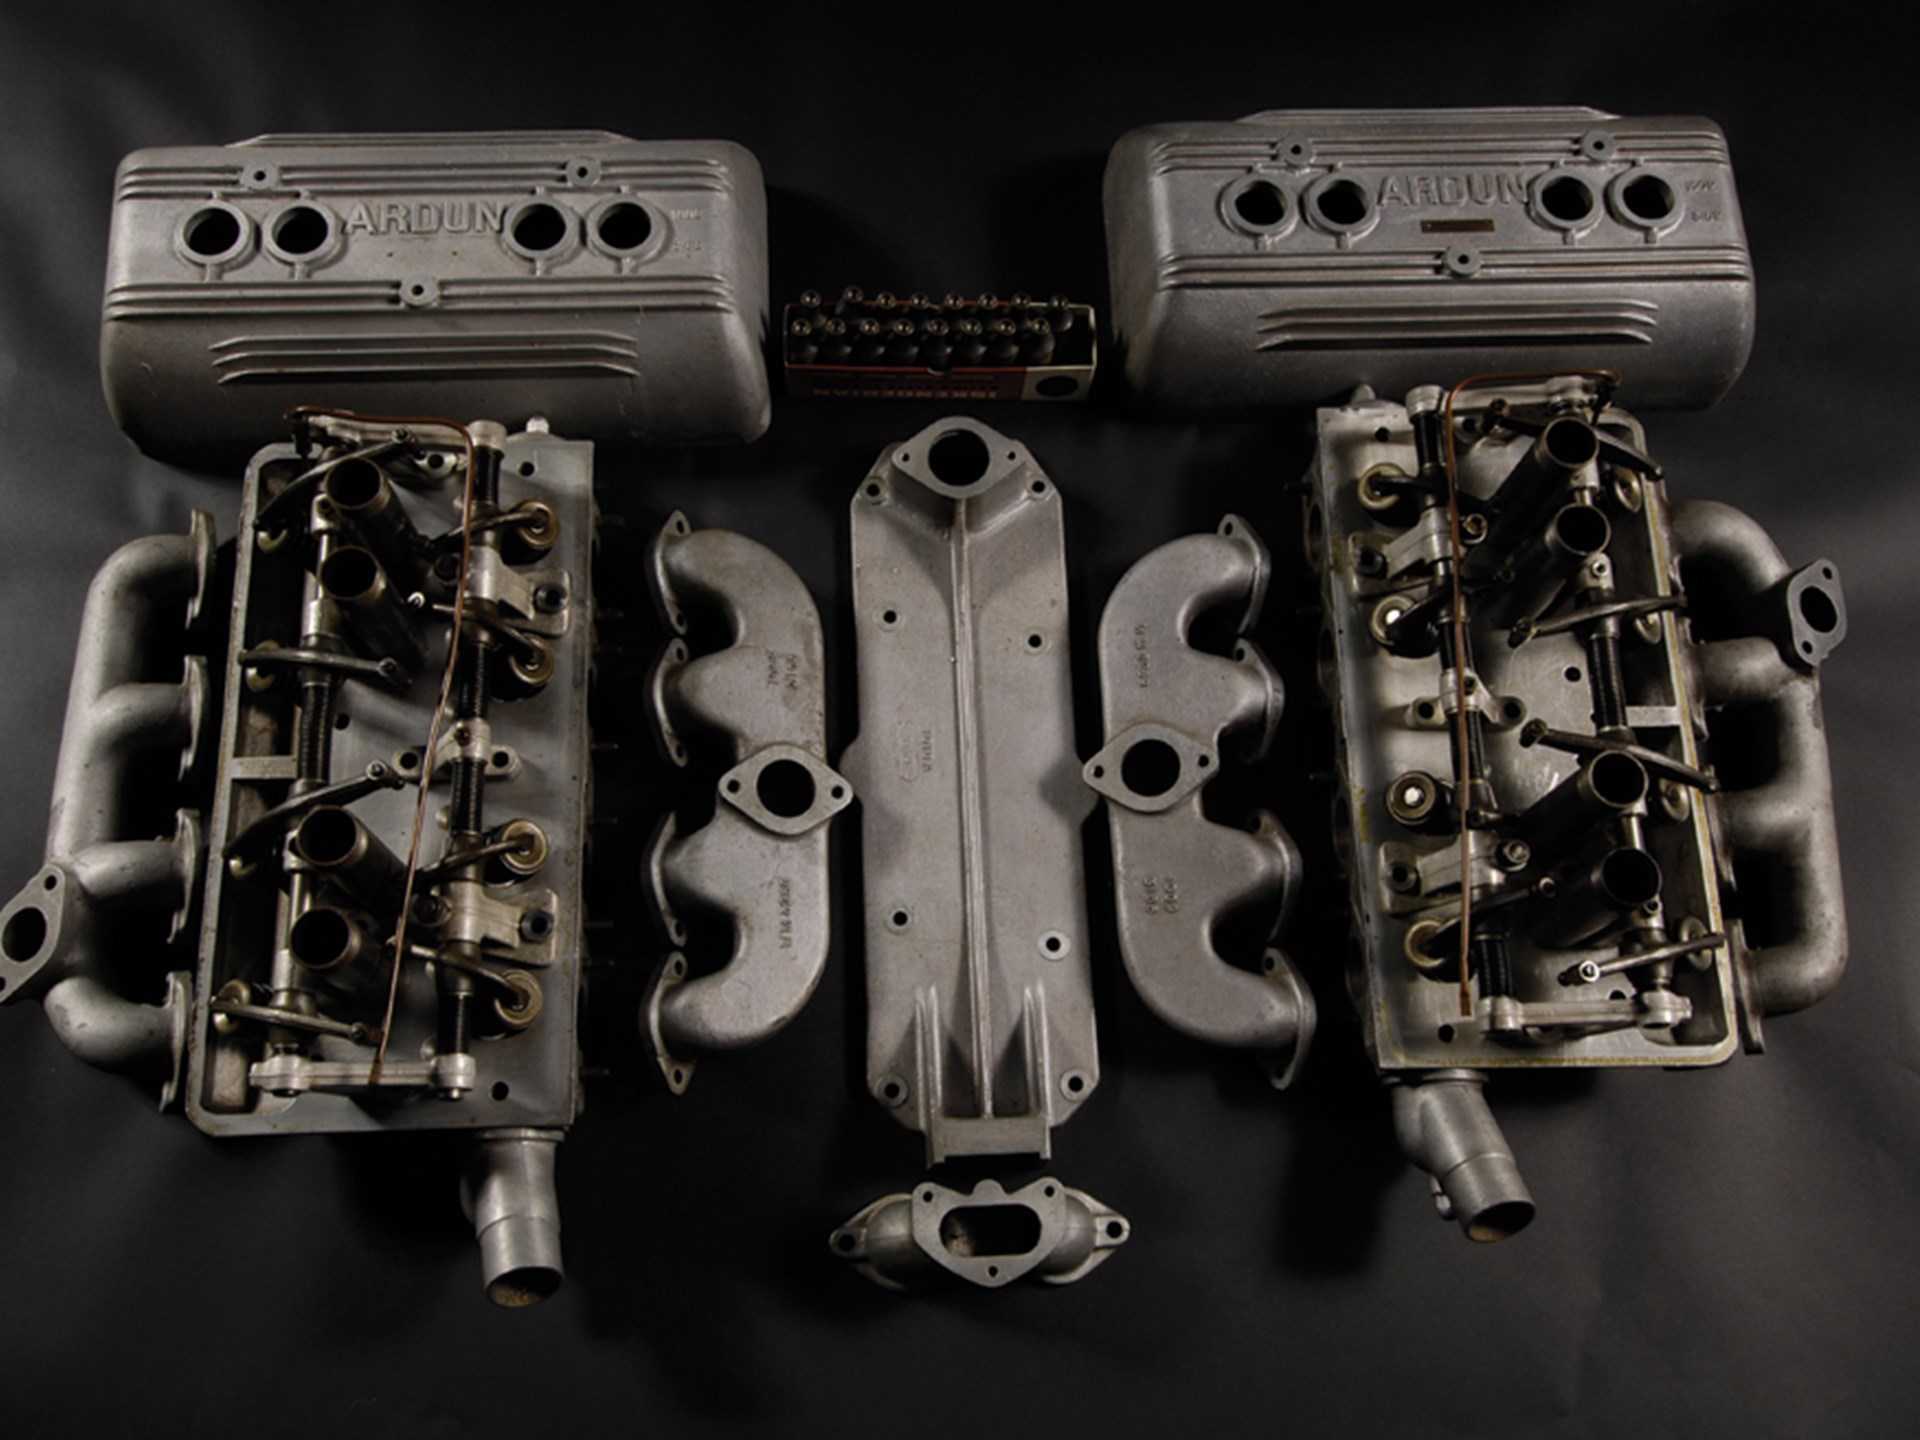 New Old Stock Ardun OHV Cylinder Heads for 1938-1953 Ford Flathead V8 Joe&a...